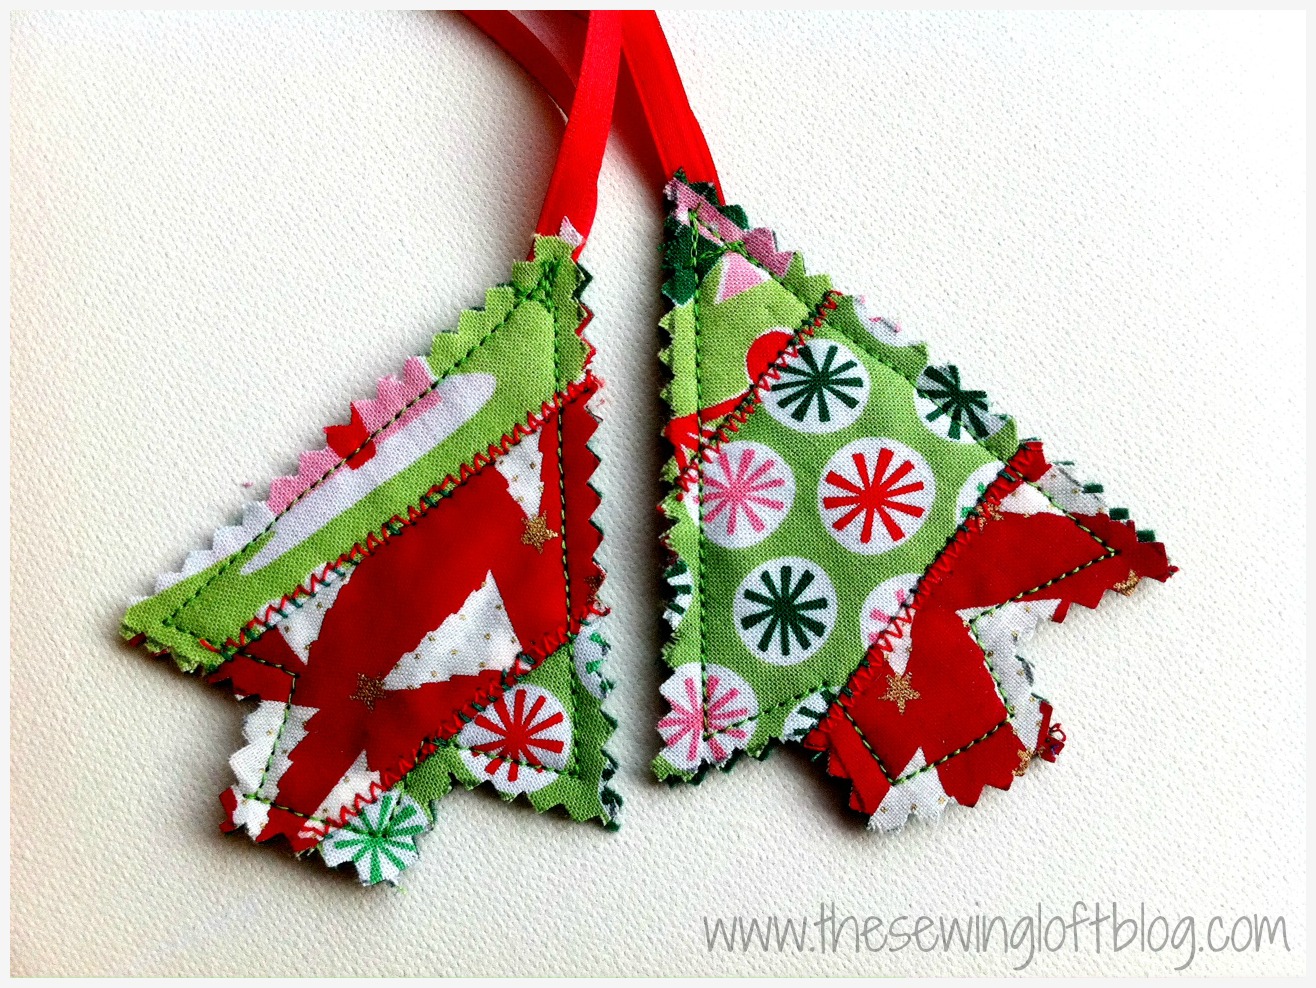 Easy tree ornaments made from scrap fabrics. By The Sewing Loft